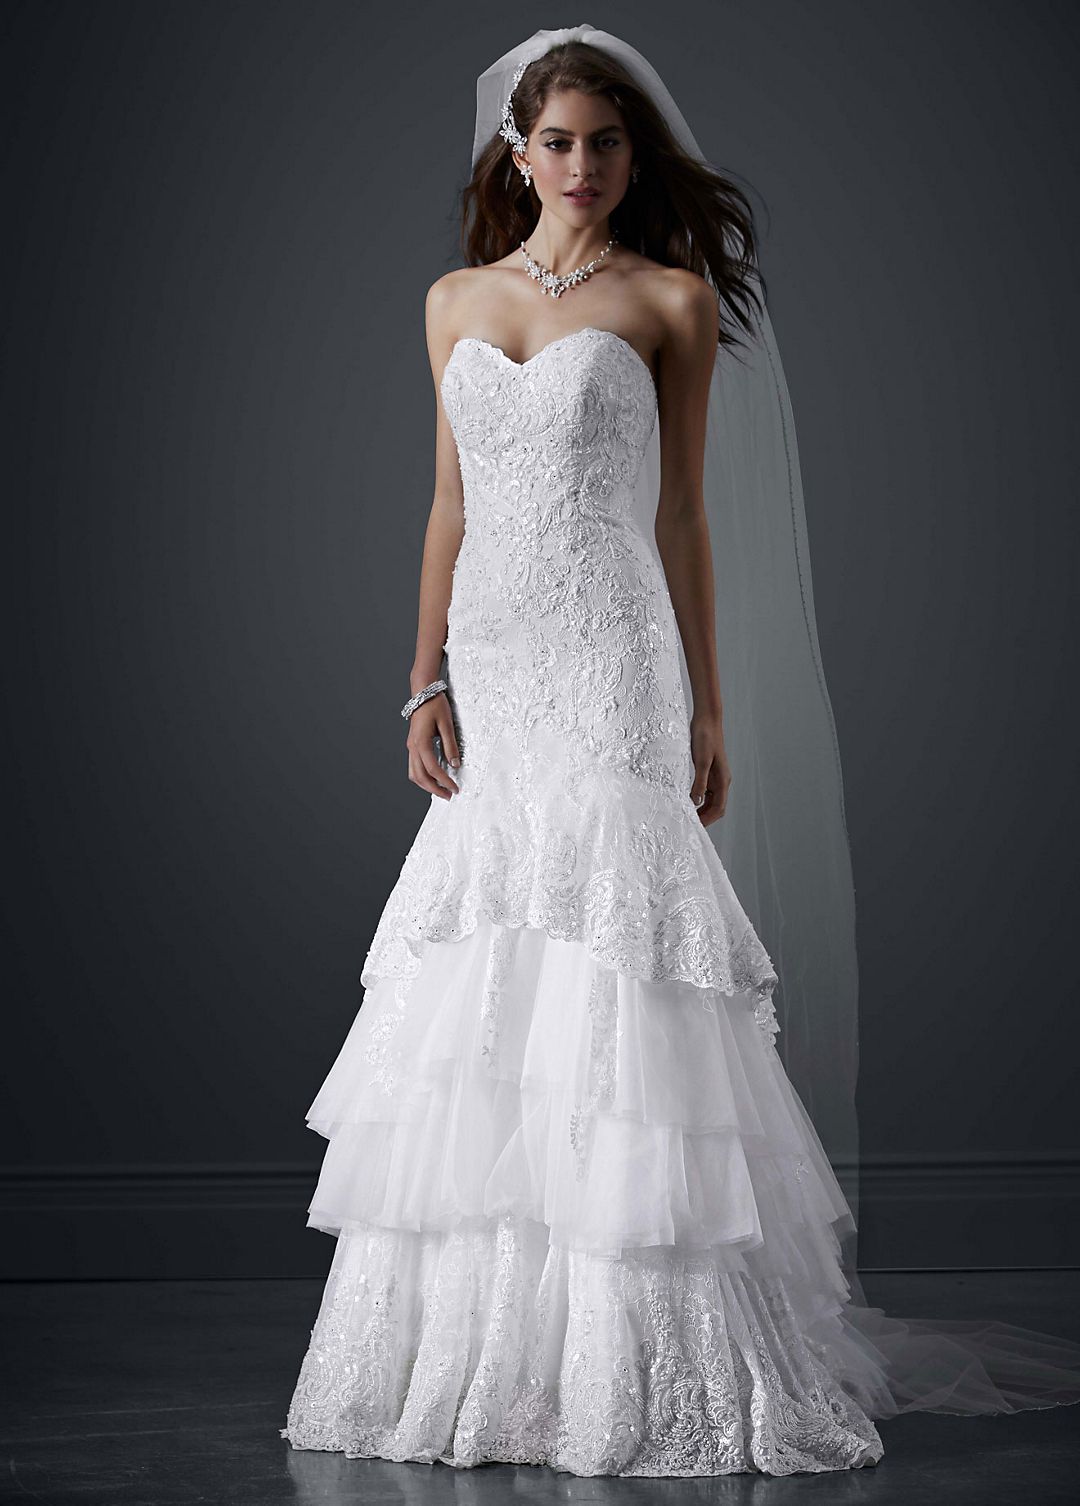 Sweetheart Lace Mermaid Gown with Tiered Skirt Image 1